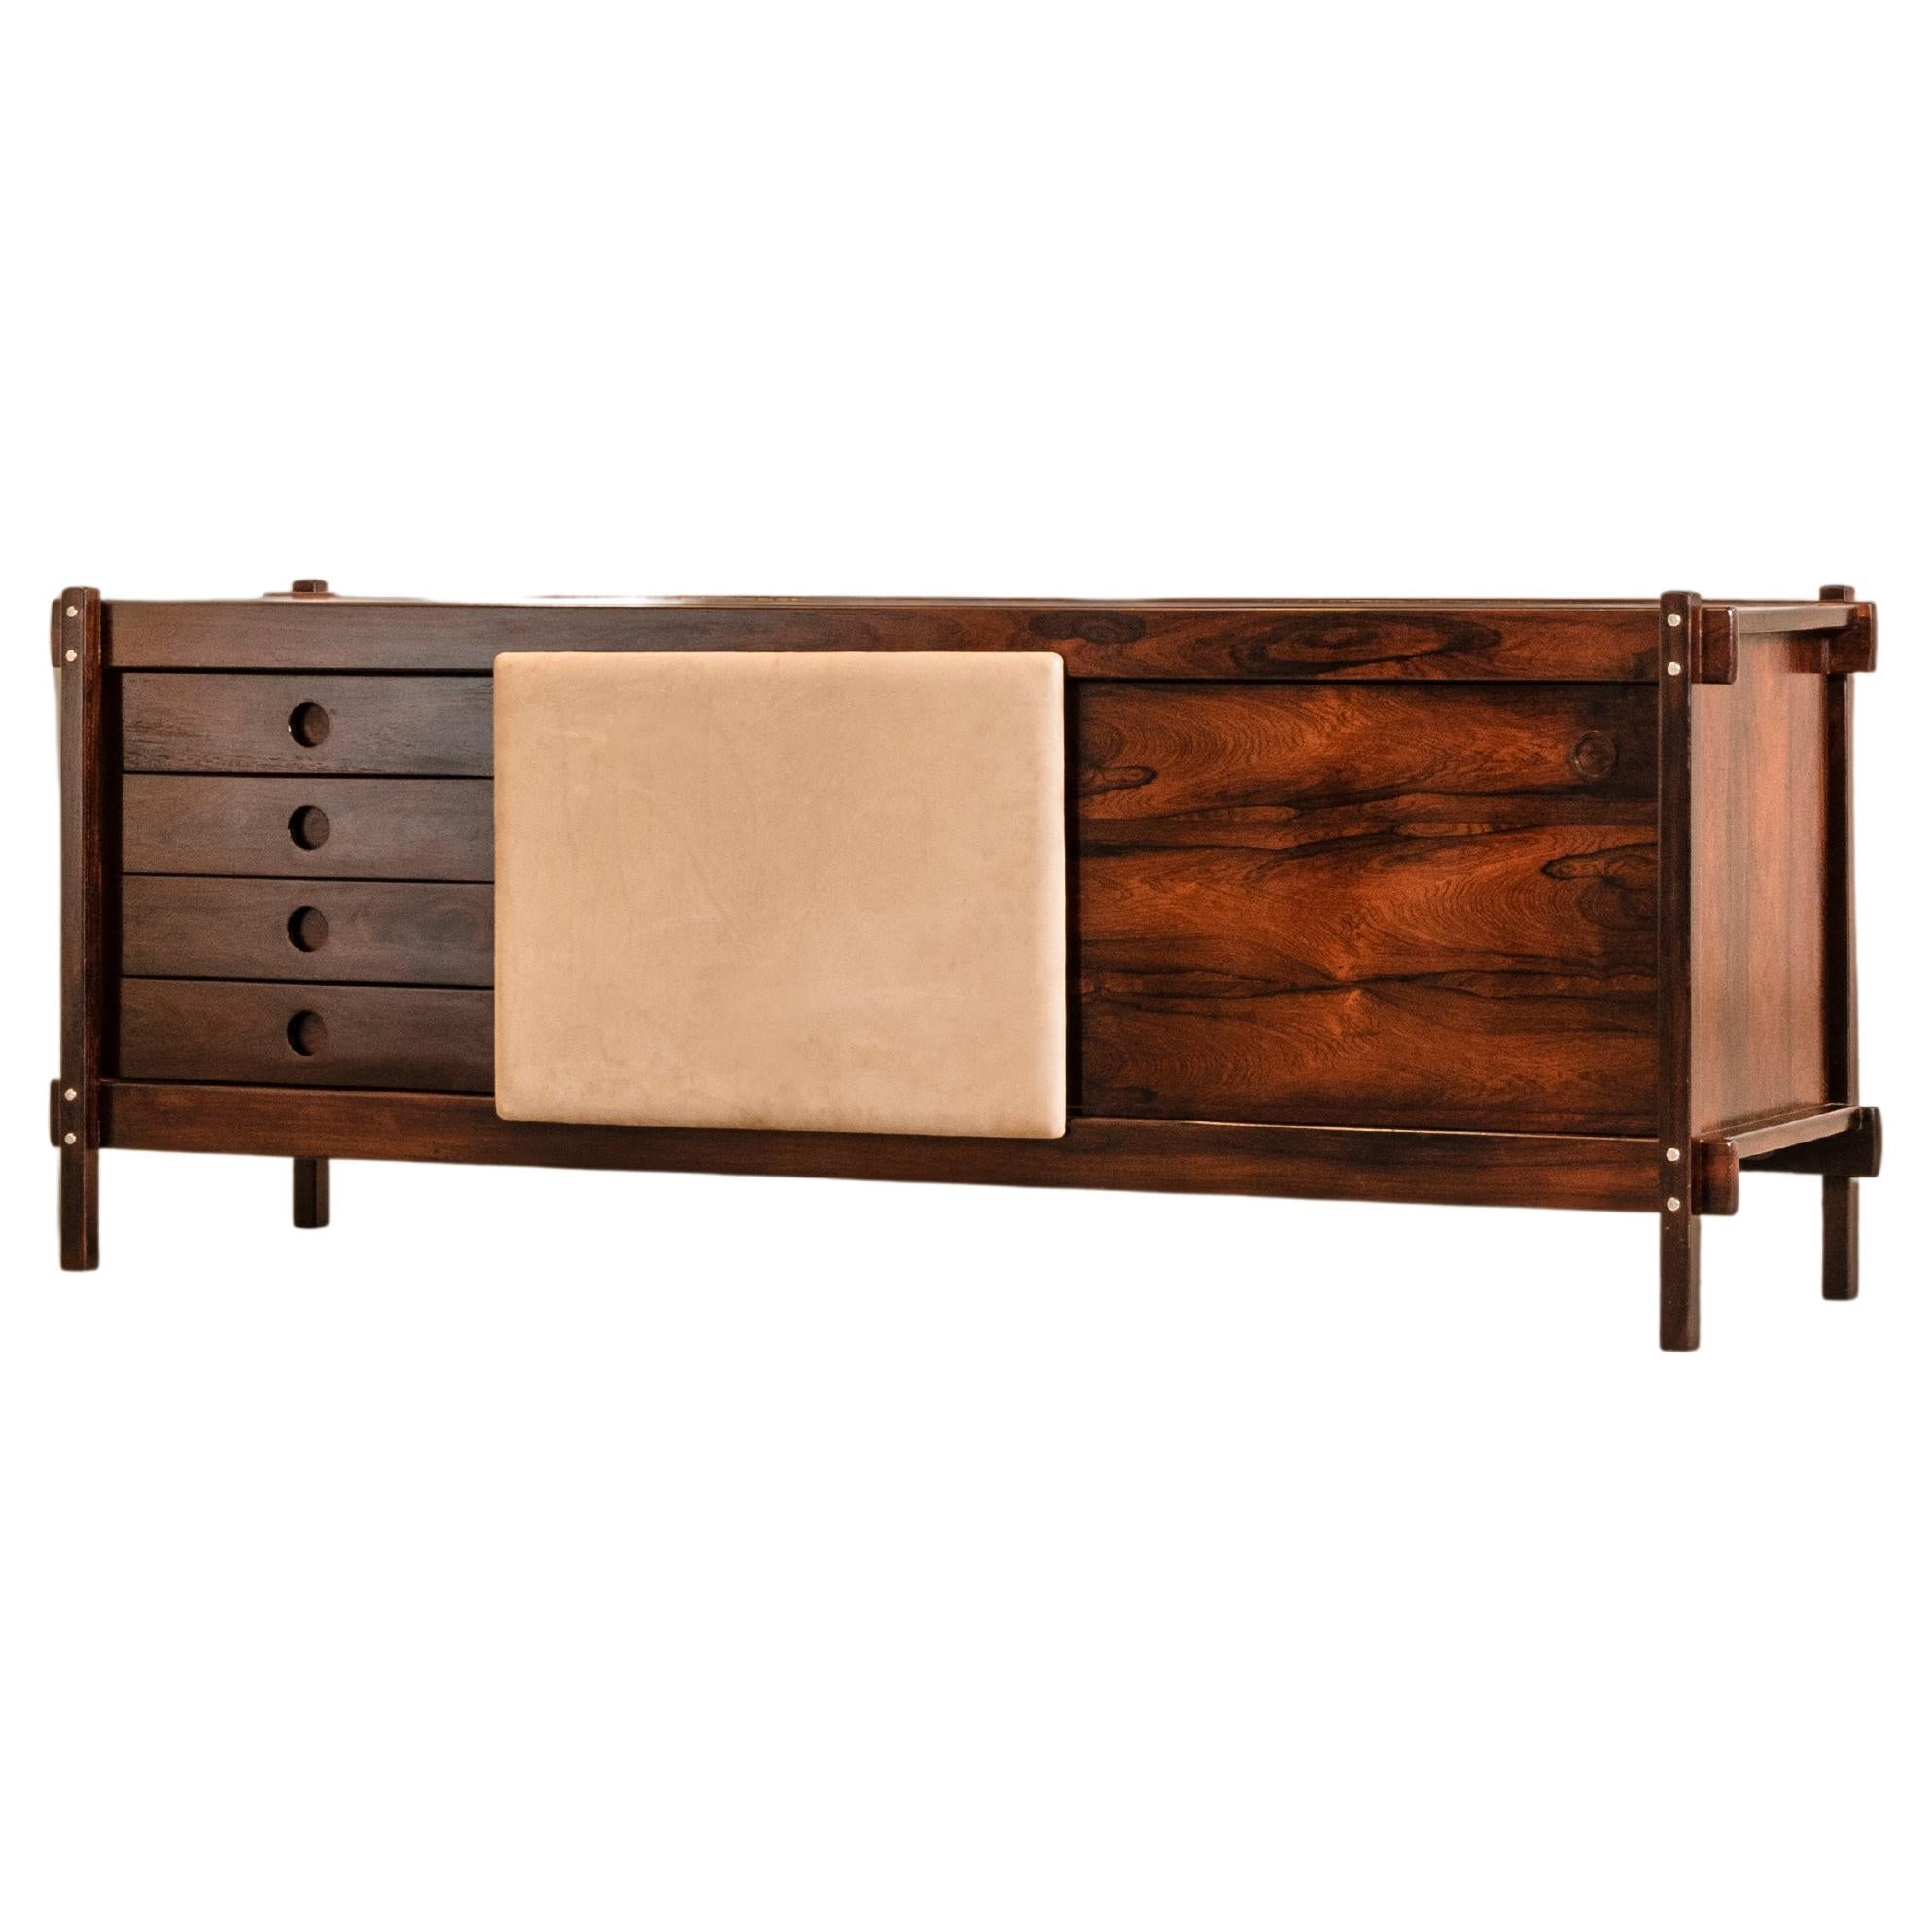 Rare Sideboard, by Sergio Rodrigues, 60s Brazilian Mid-Century Modern